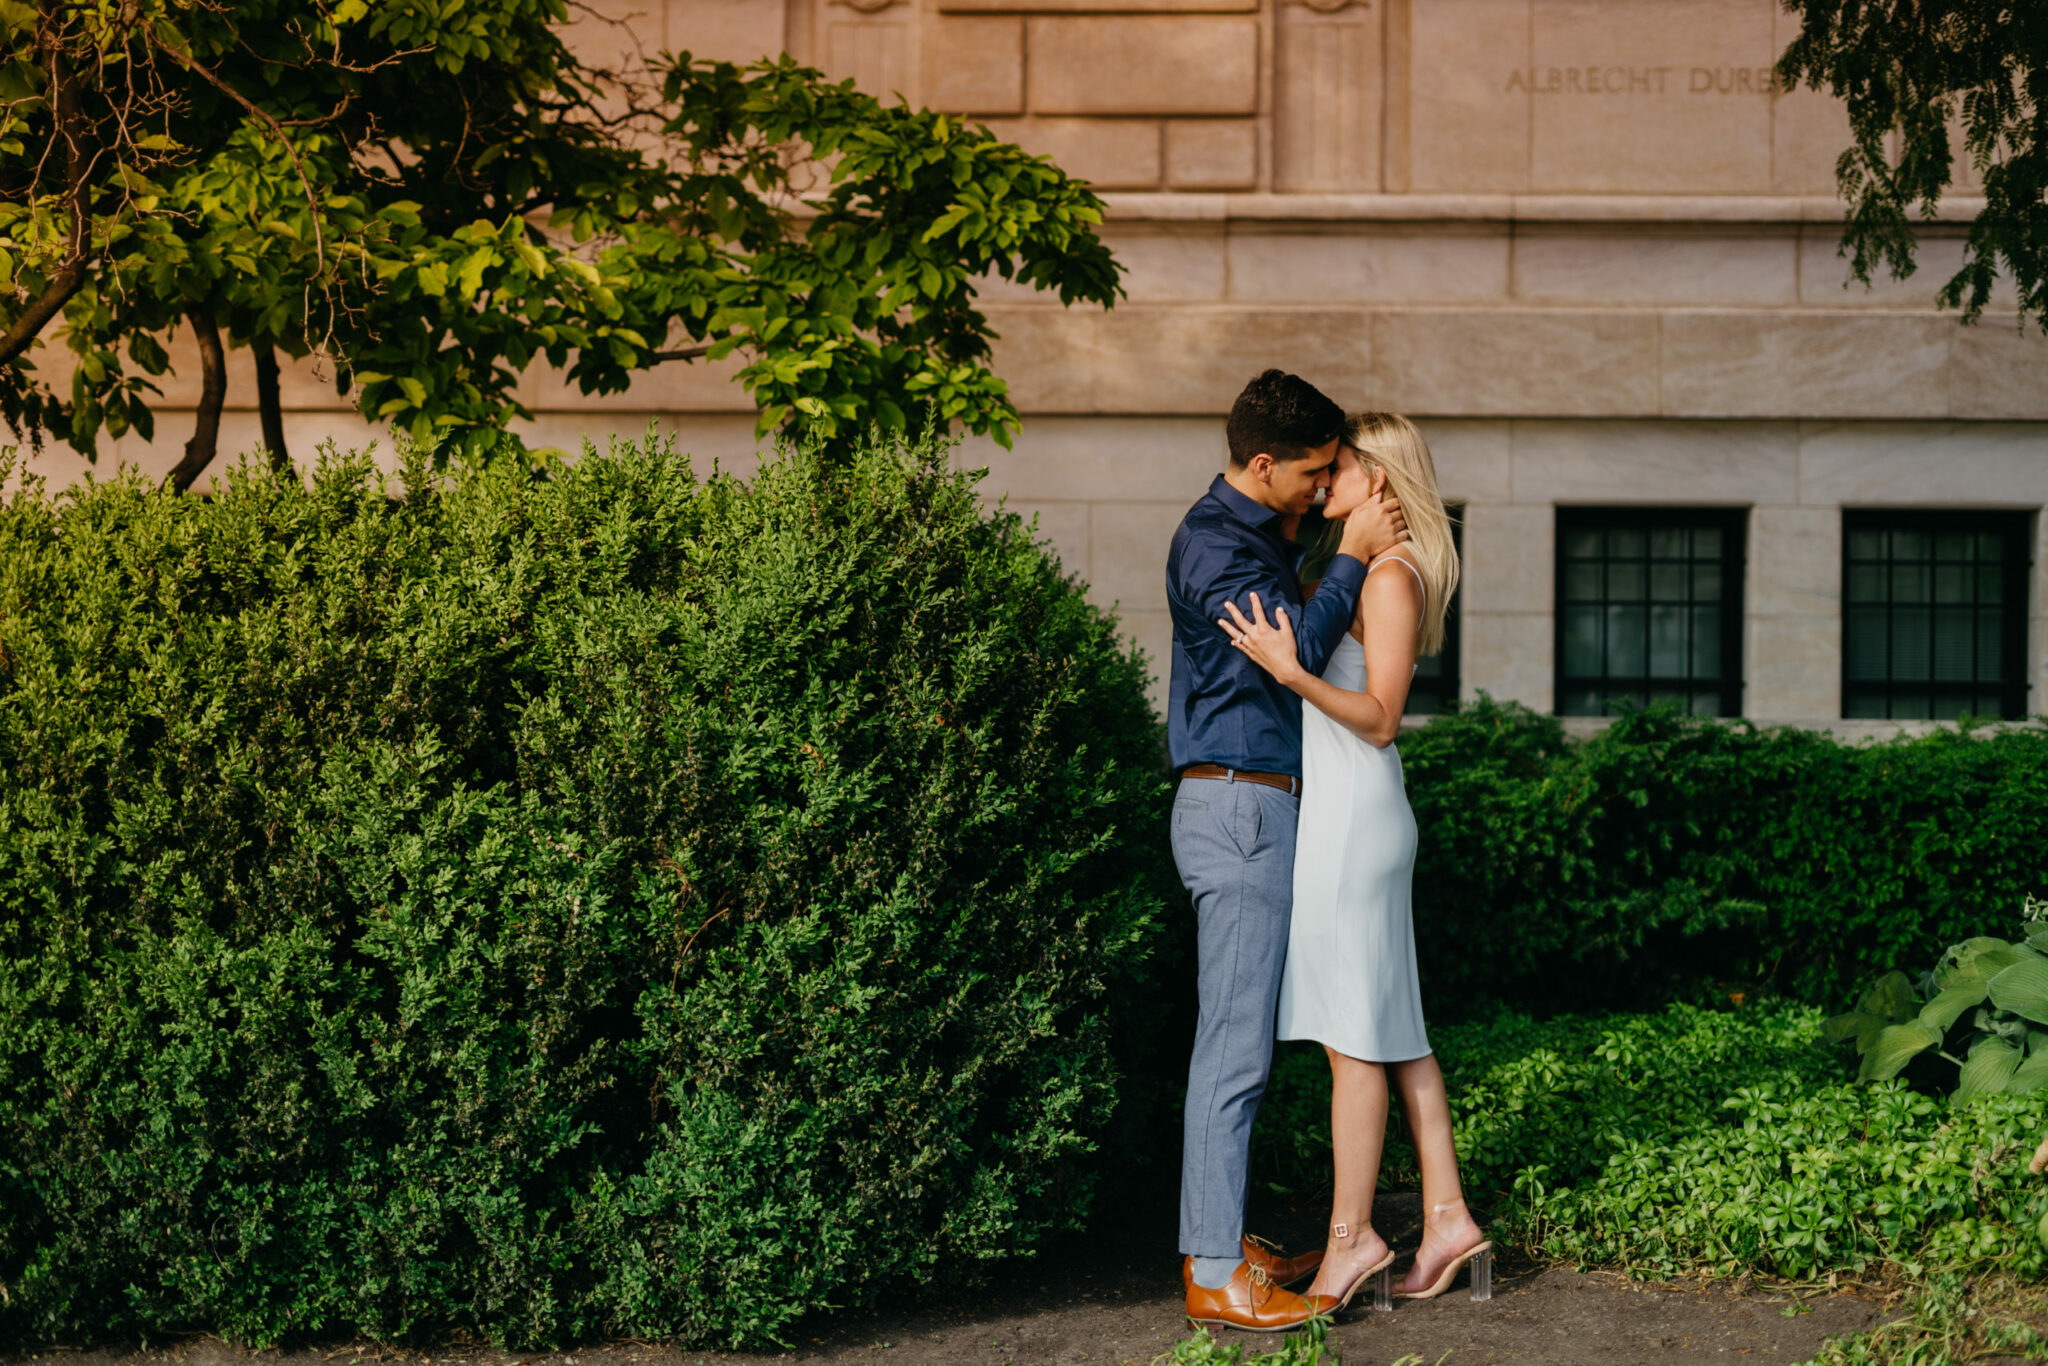 Camden and Julio had a gorgeous summer Detroit Institute of Arts engagement session in Detroit, Michigan. They are simply stunning. From their connection, their outfit selections, to the colors choices, it could not have gone any better. During our time I had the opportunity to watch them connect an I have to say you guys, you can certainly feel their love in every capture. I hope you enjoy these as much as I do!